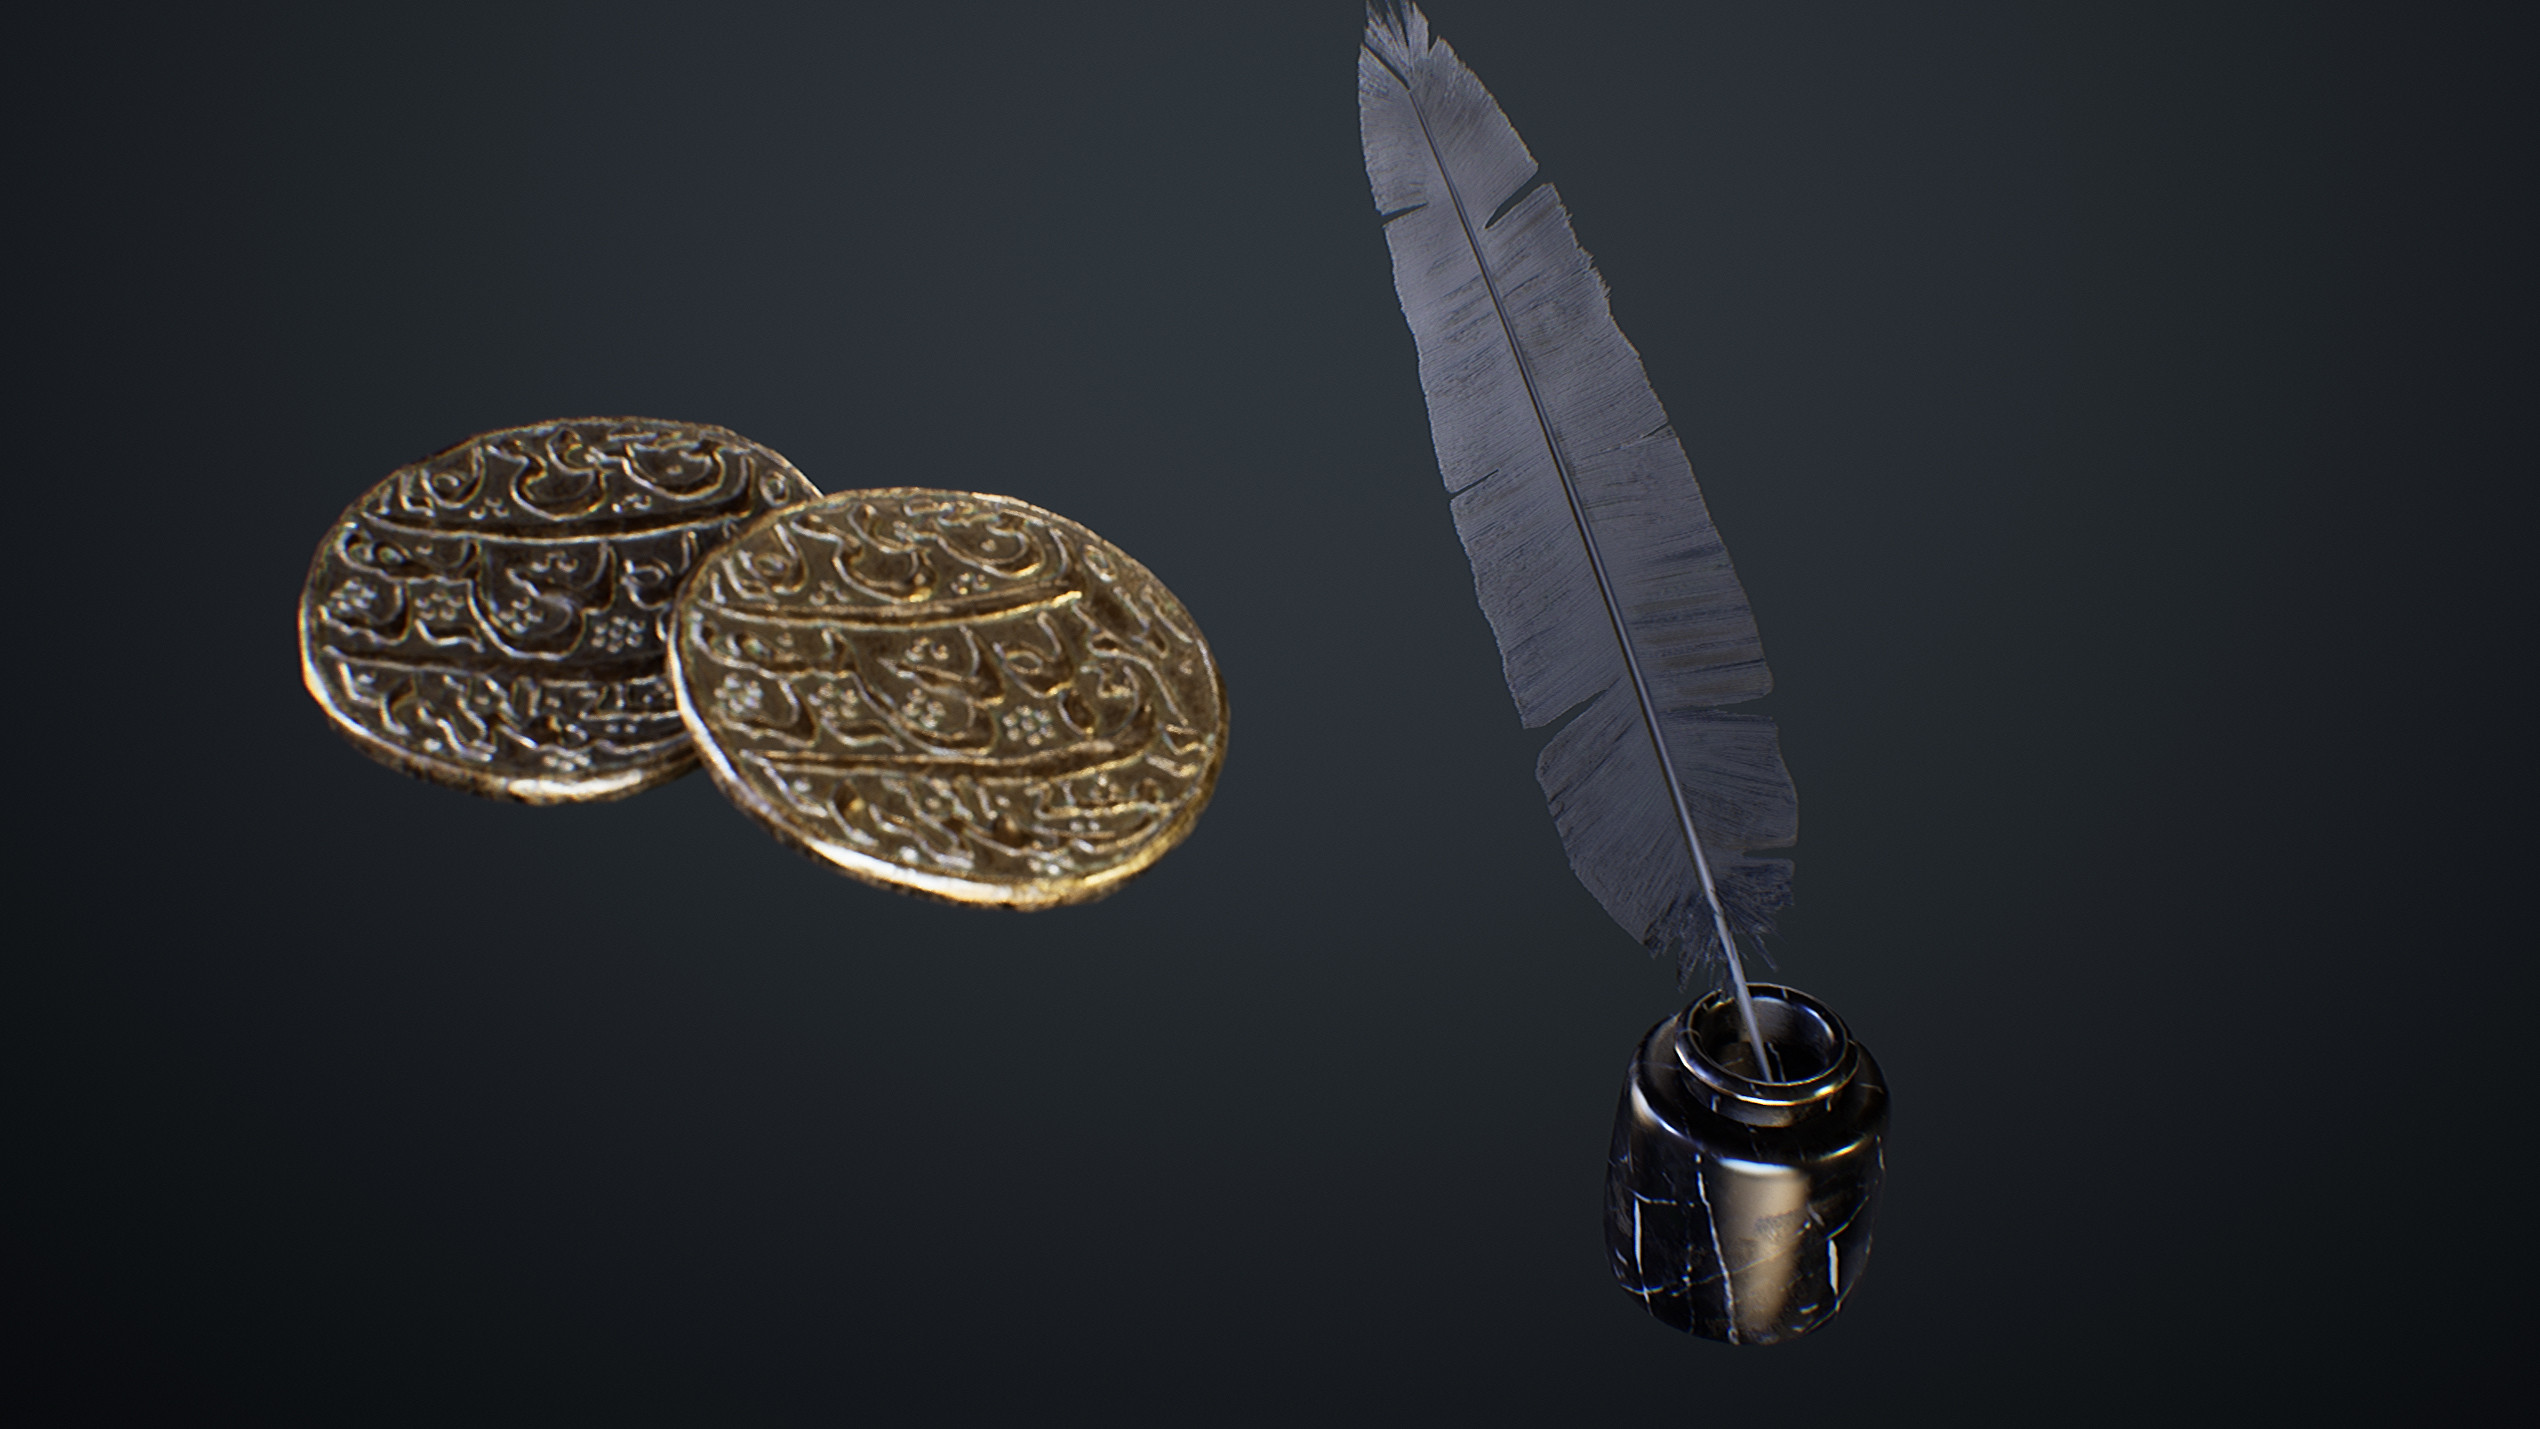 UE4 screenshot close up detailed shot of the feather and ink holder.